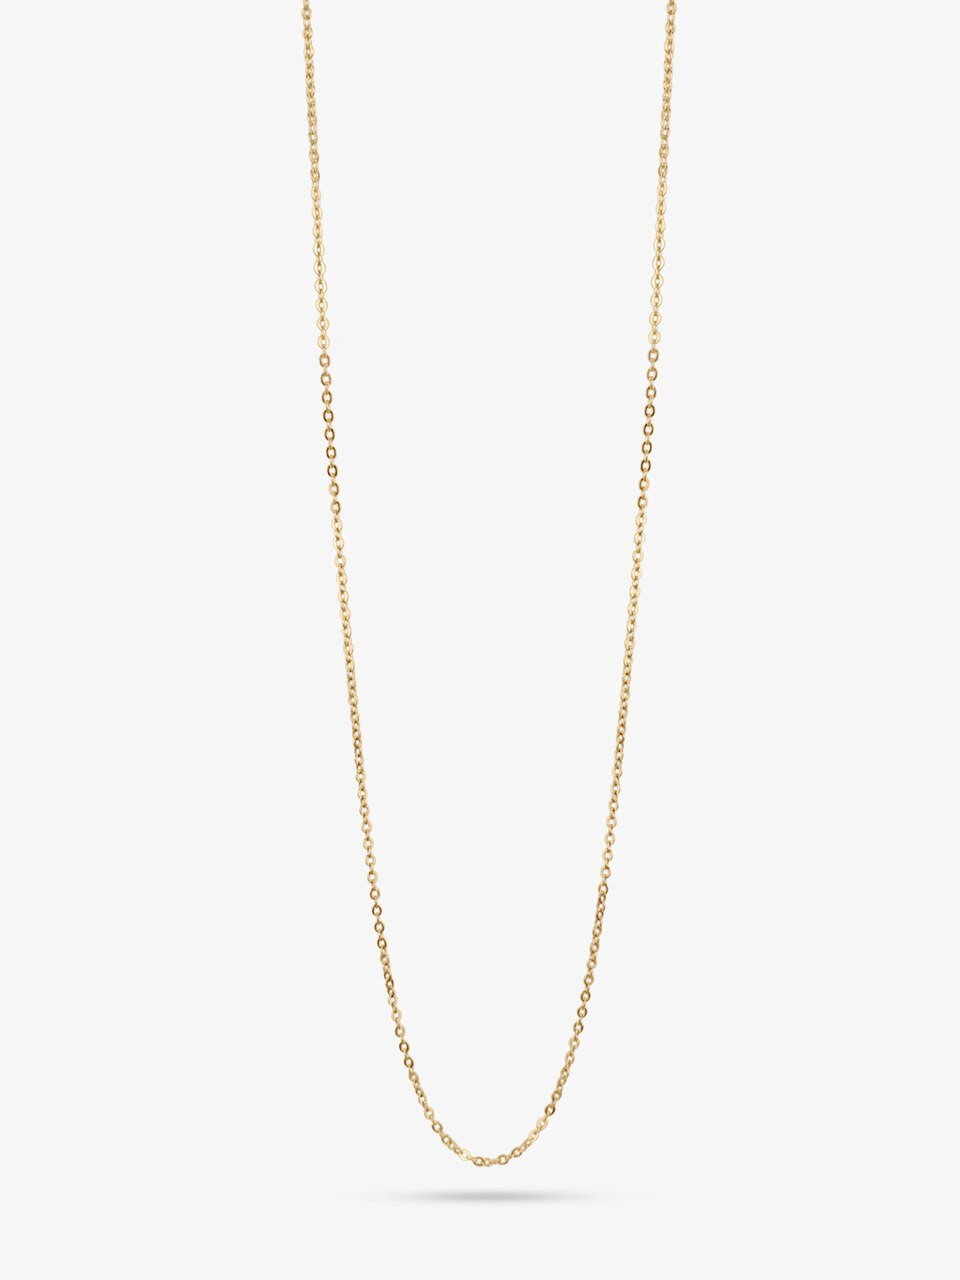 Catherine 14K Gold Adjustable Dainty Cable Necklace